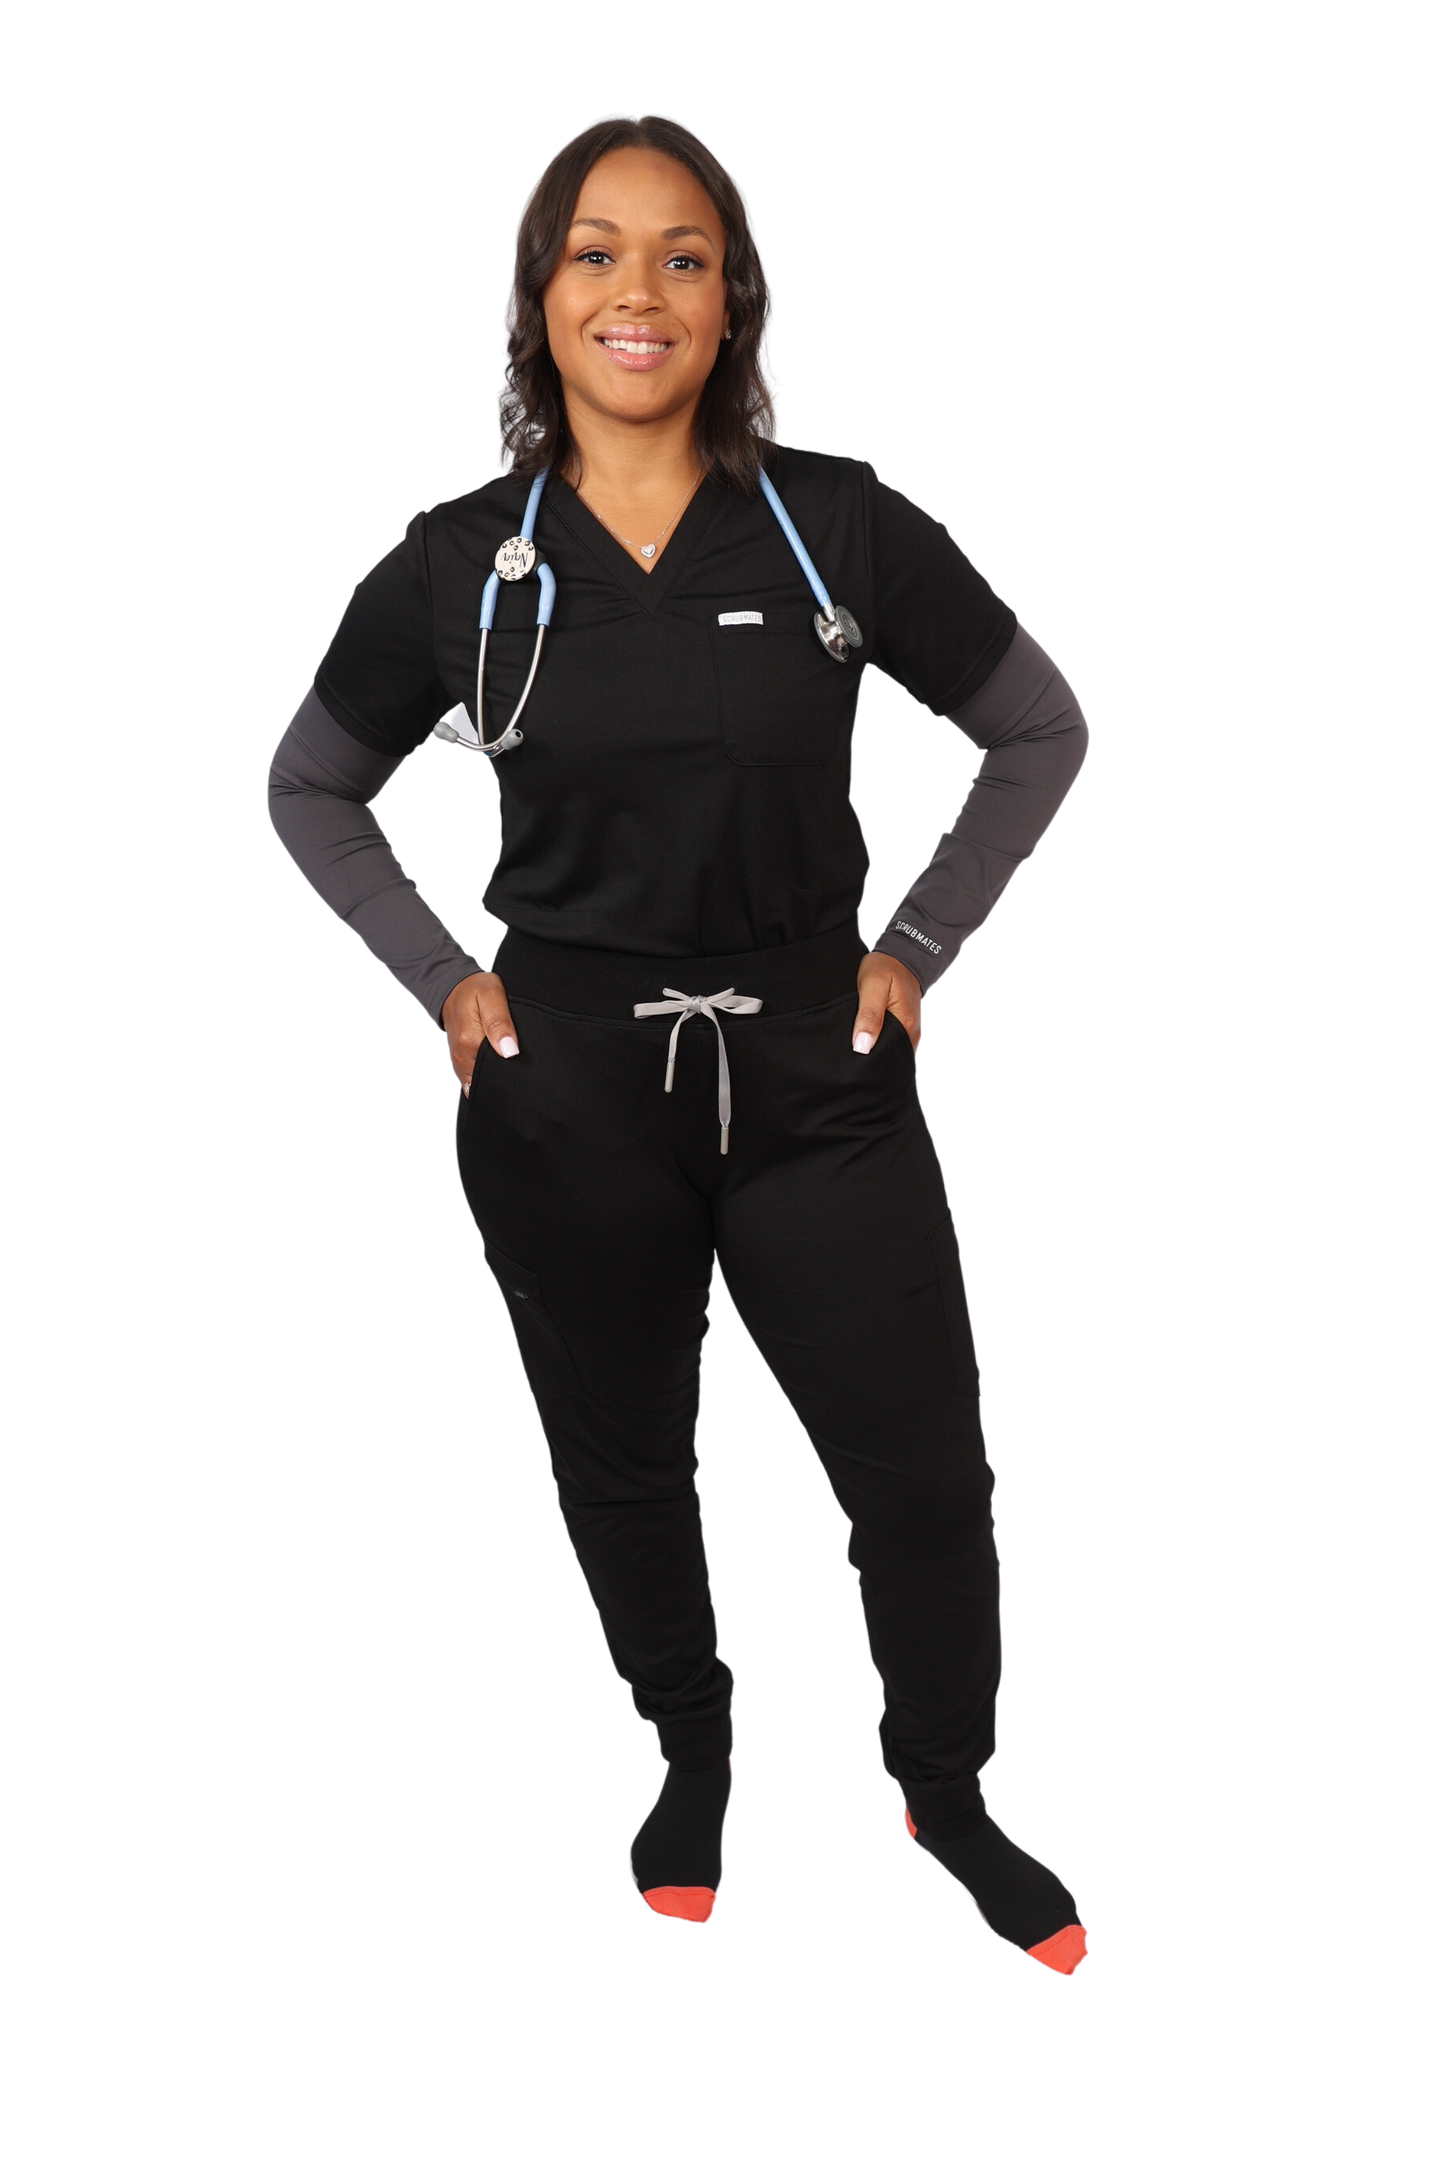 medical work uniform Scrubmates modern fit jogger black scrub pants for women made to pair perfectly with our modern fit jogger pants. Our exclusive design is on trend, professional and stylish. Made from a superior quality nylon/rayon/spandex fabric mix, this set offers unparalleled all-day comfort. Our luxe fabric blend offers the ultimate amount of stretch, and is designed to be flattering at every angle innovative design offers a chest pocket and 2 kangaroo pockets best scrub set for women figs scrubs